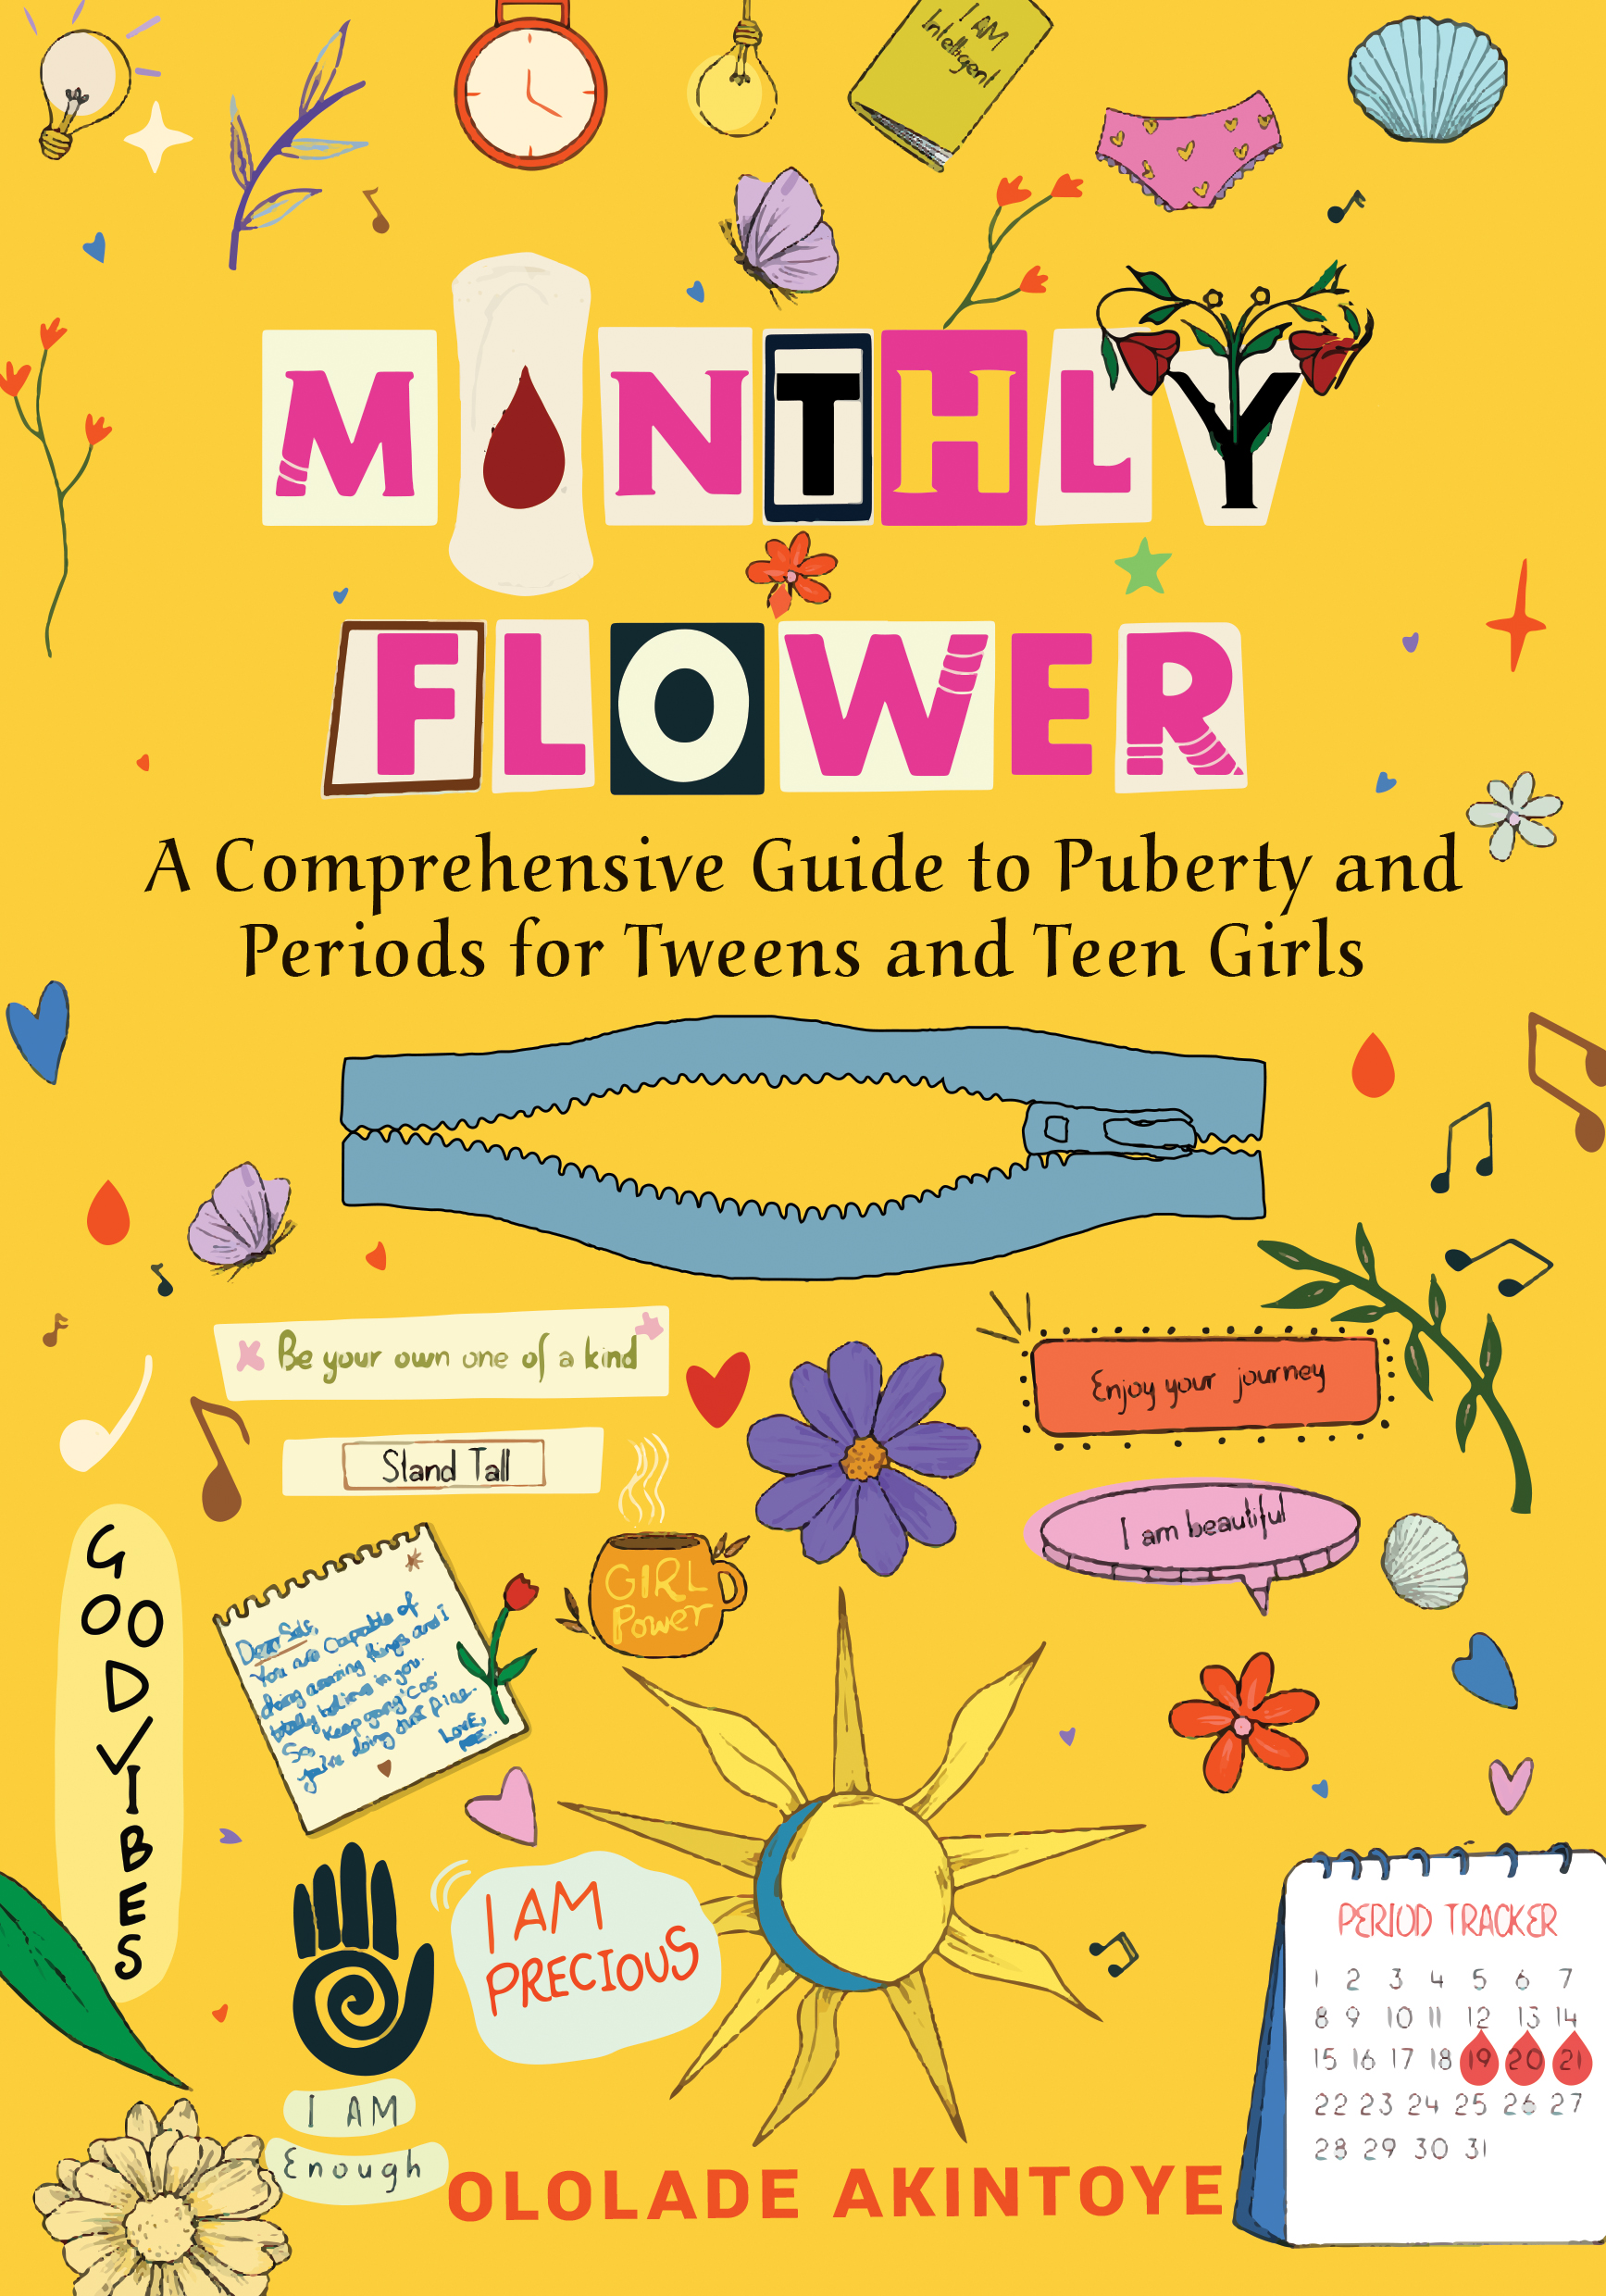 Monthly-Flower--A-Comprehensive-Guide-To-Puberty-and-Periods-for-Tweens-and-Teen-Girls